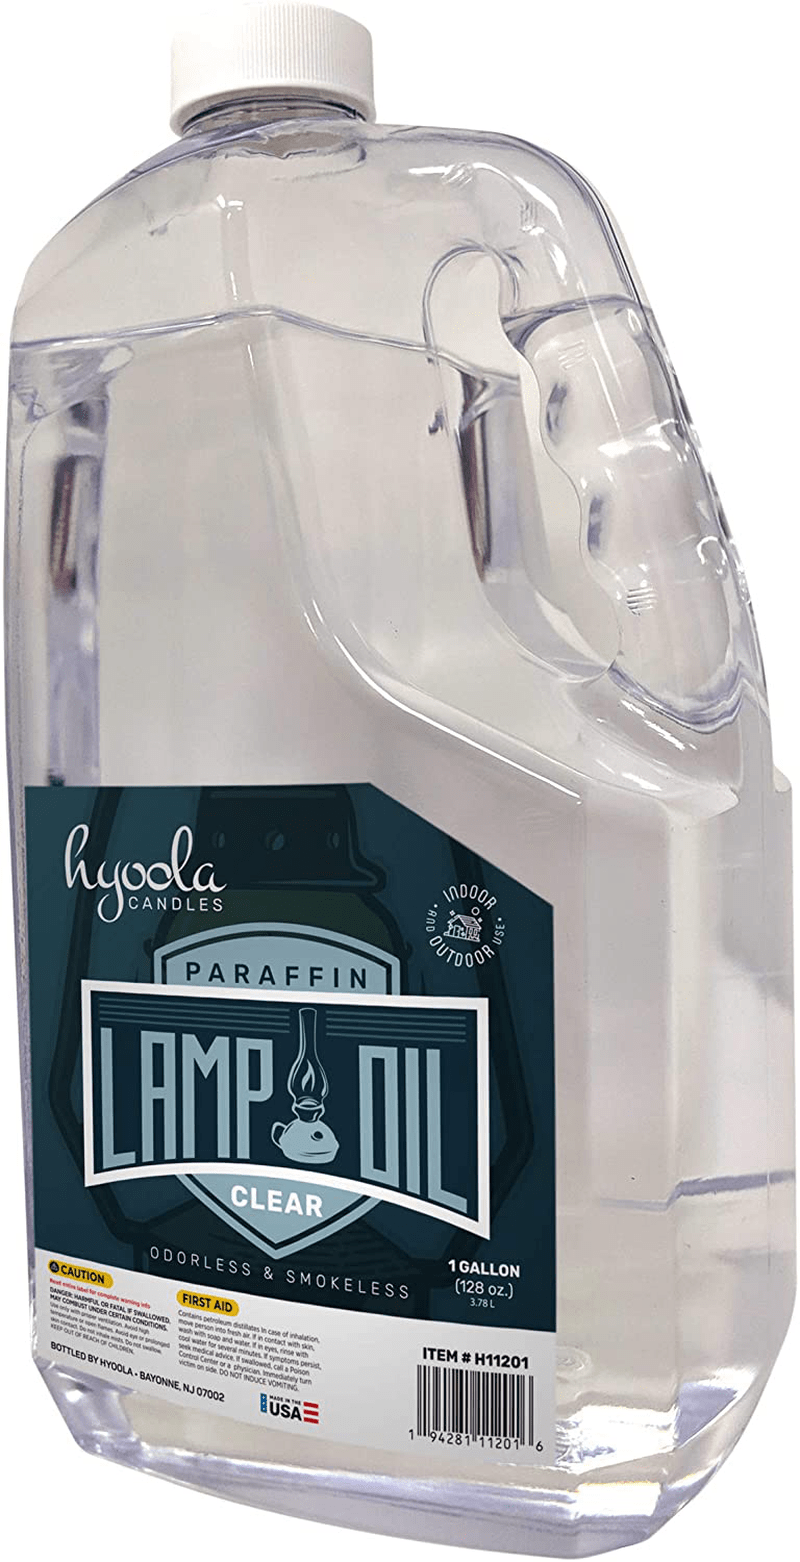 1-Gallon Liquid Paraffin Lamp Oil - Clear Smokeless, Odorless, Ultra Clean Burning Fuel for Indoor and Outdoor Use - Highest Purity Available - by Hyoola Candles Home & Garden > Lighting Accessories > Oil Lamp Fuel Hyoola Candles   